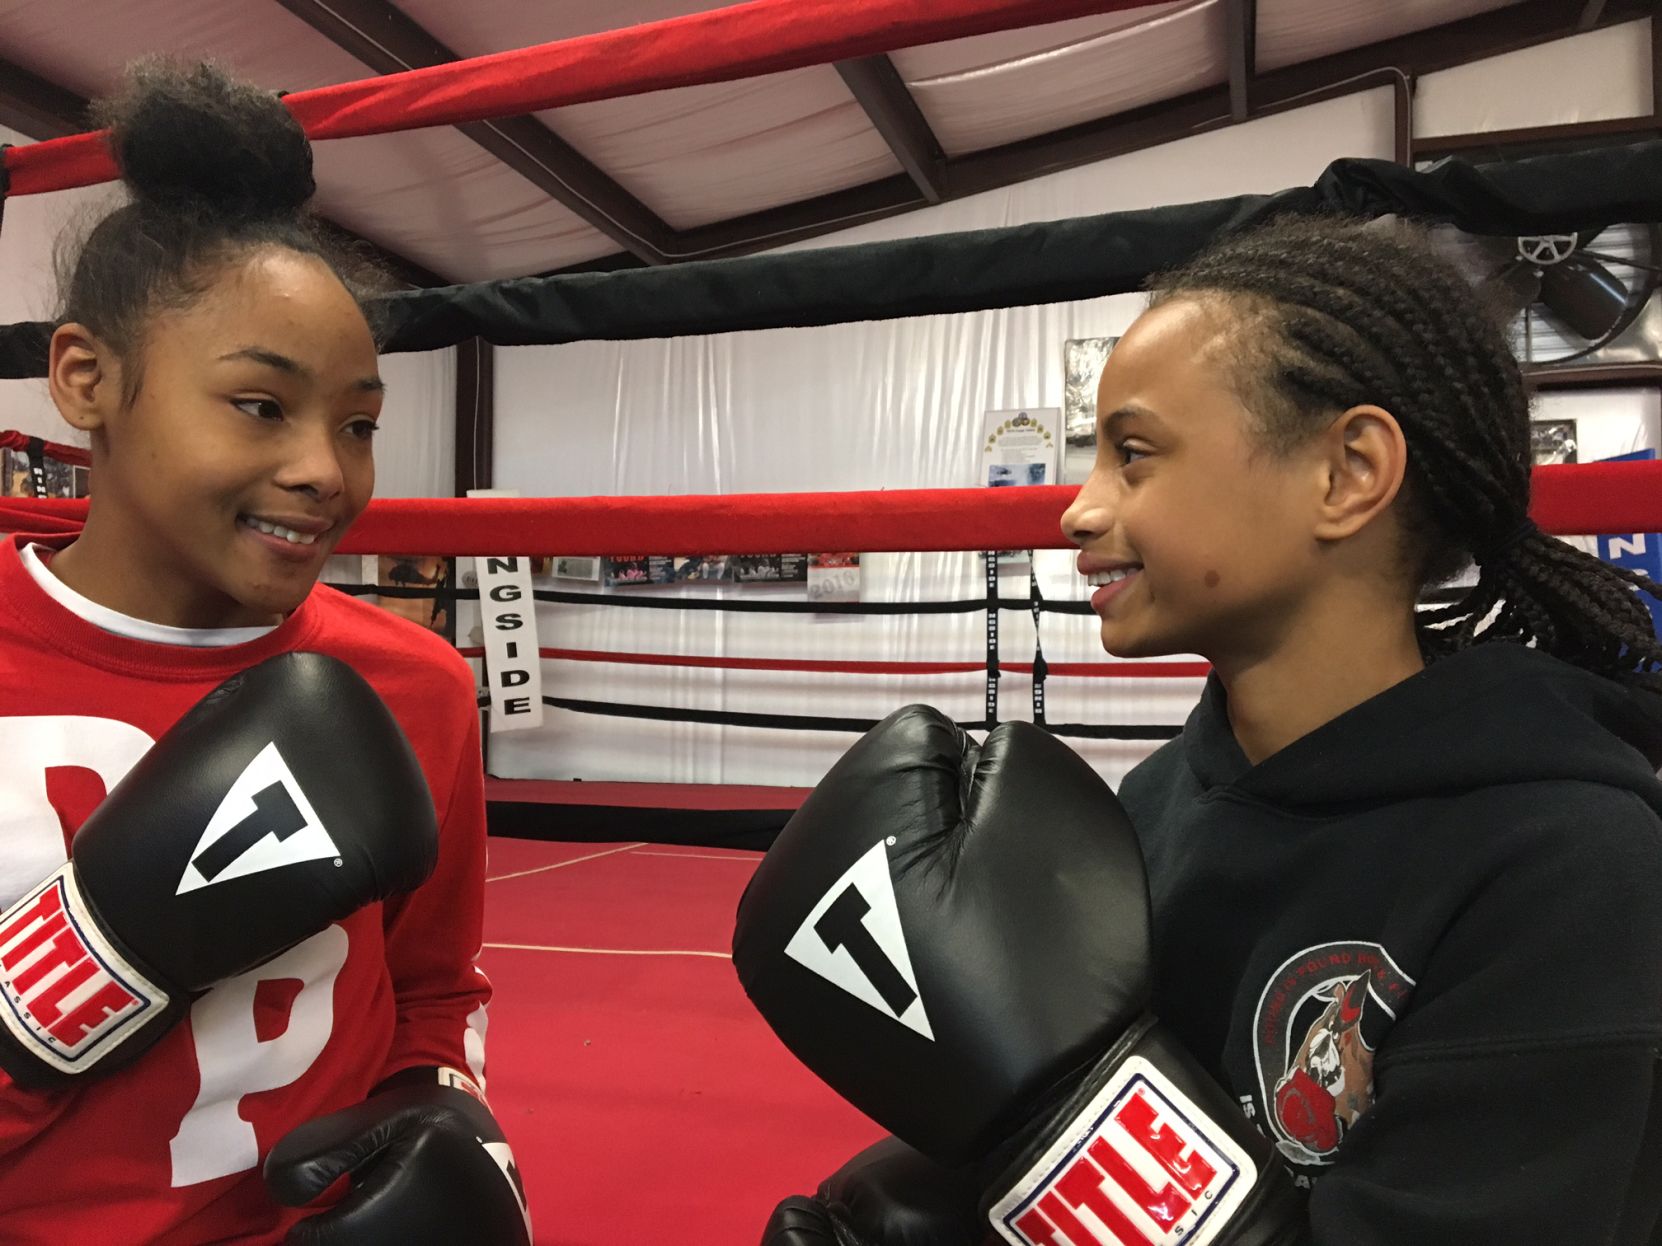 Local youth boxing duo compete in USA National Championships